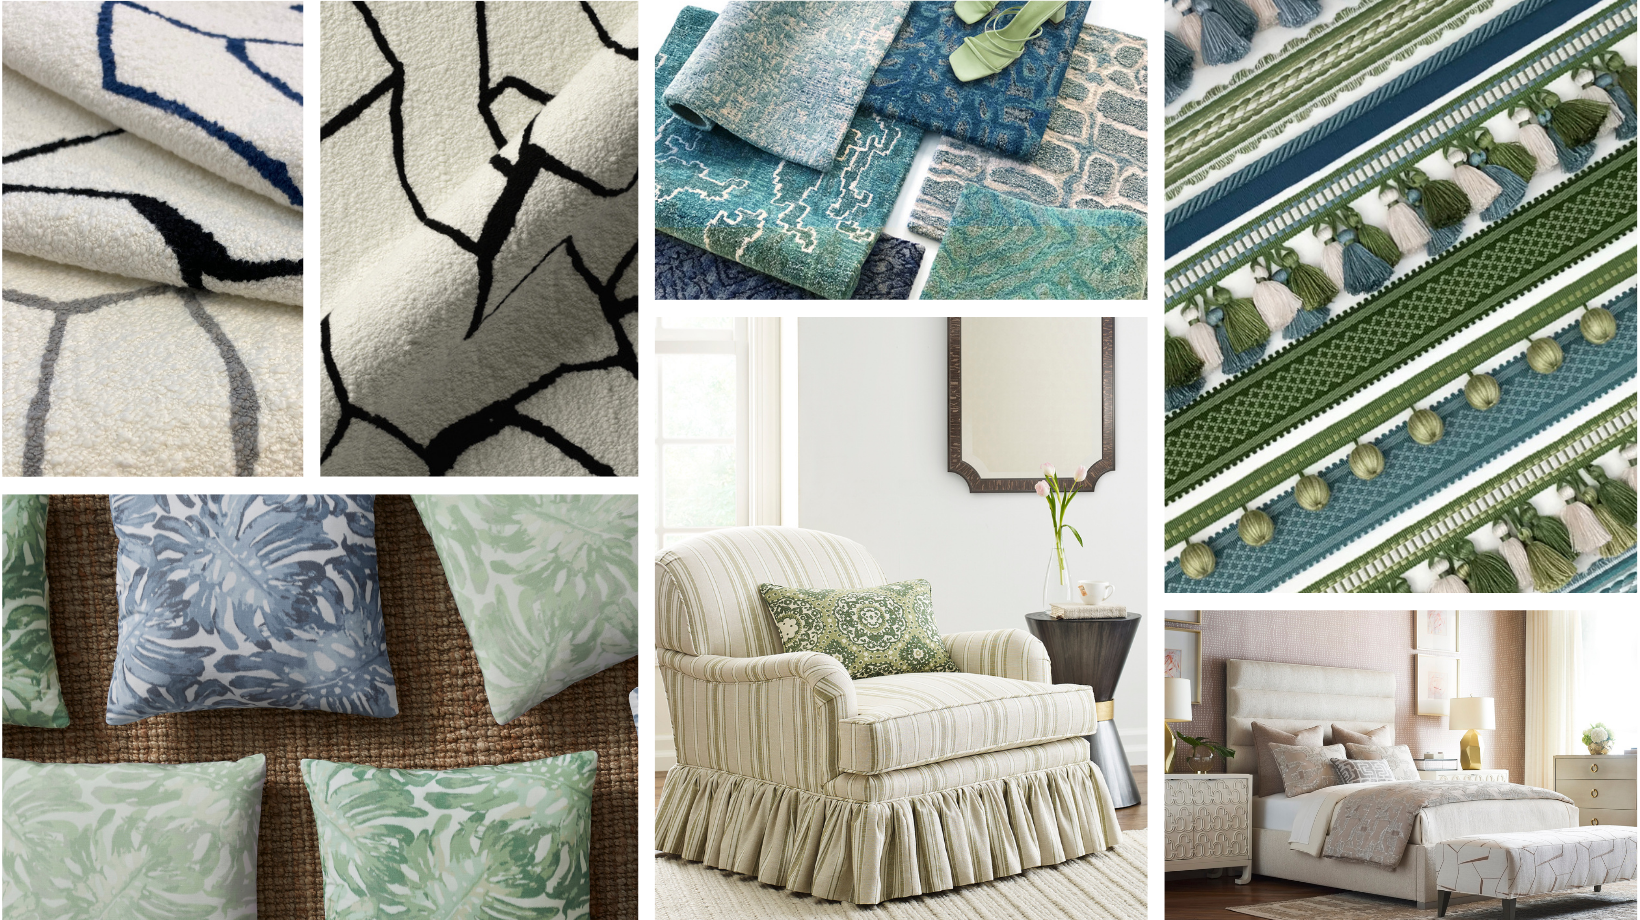 Our 2021 Highlights from Kravet Inc.